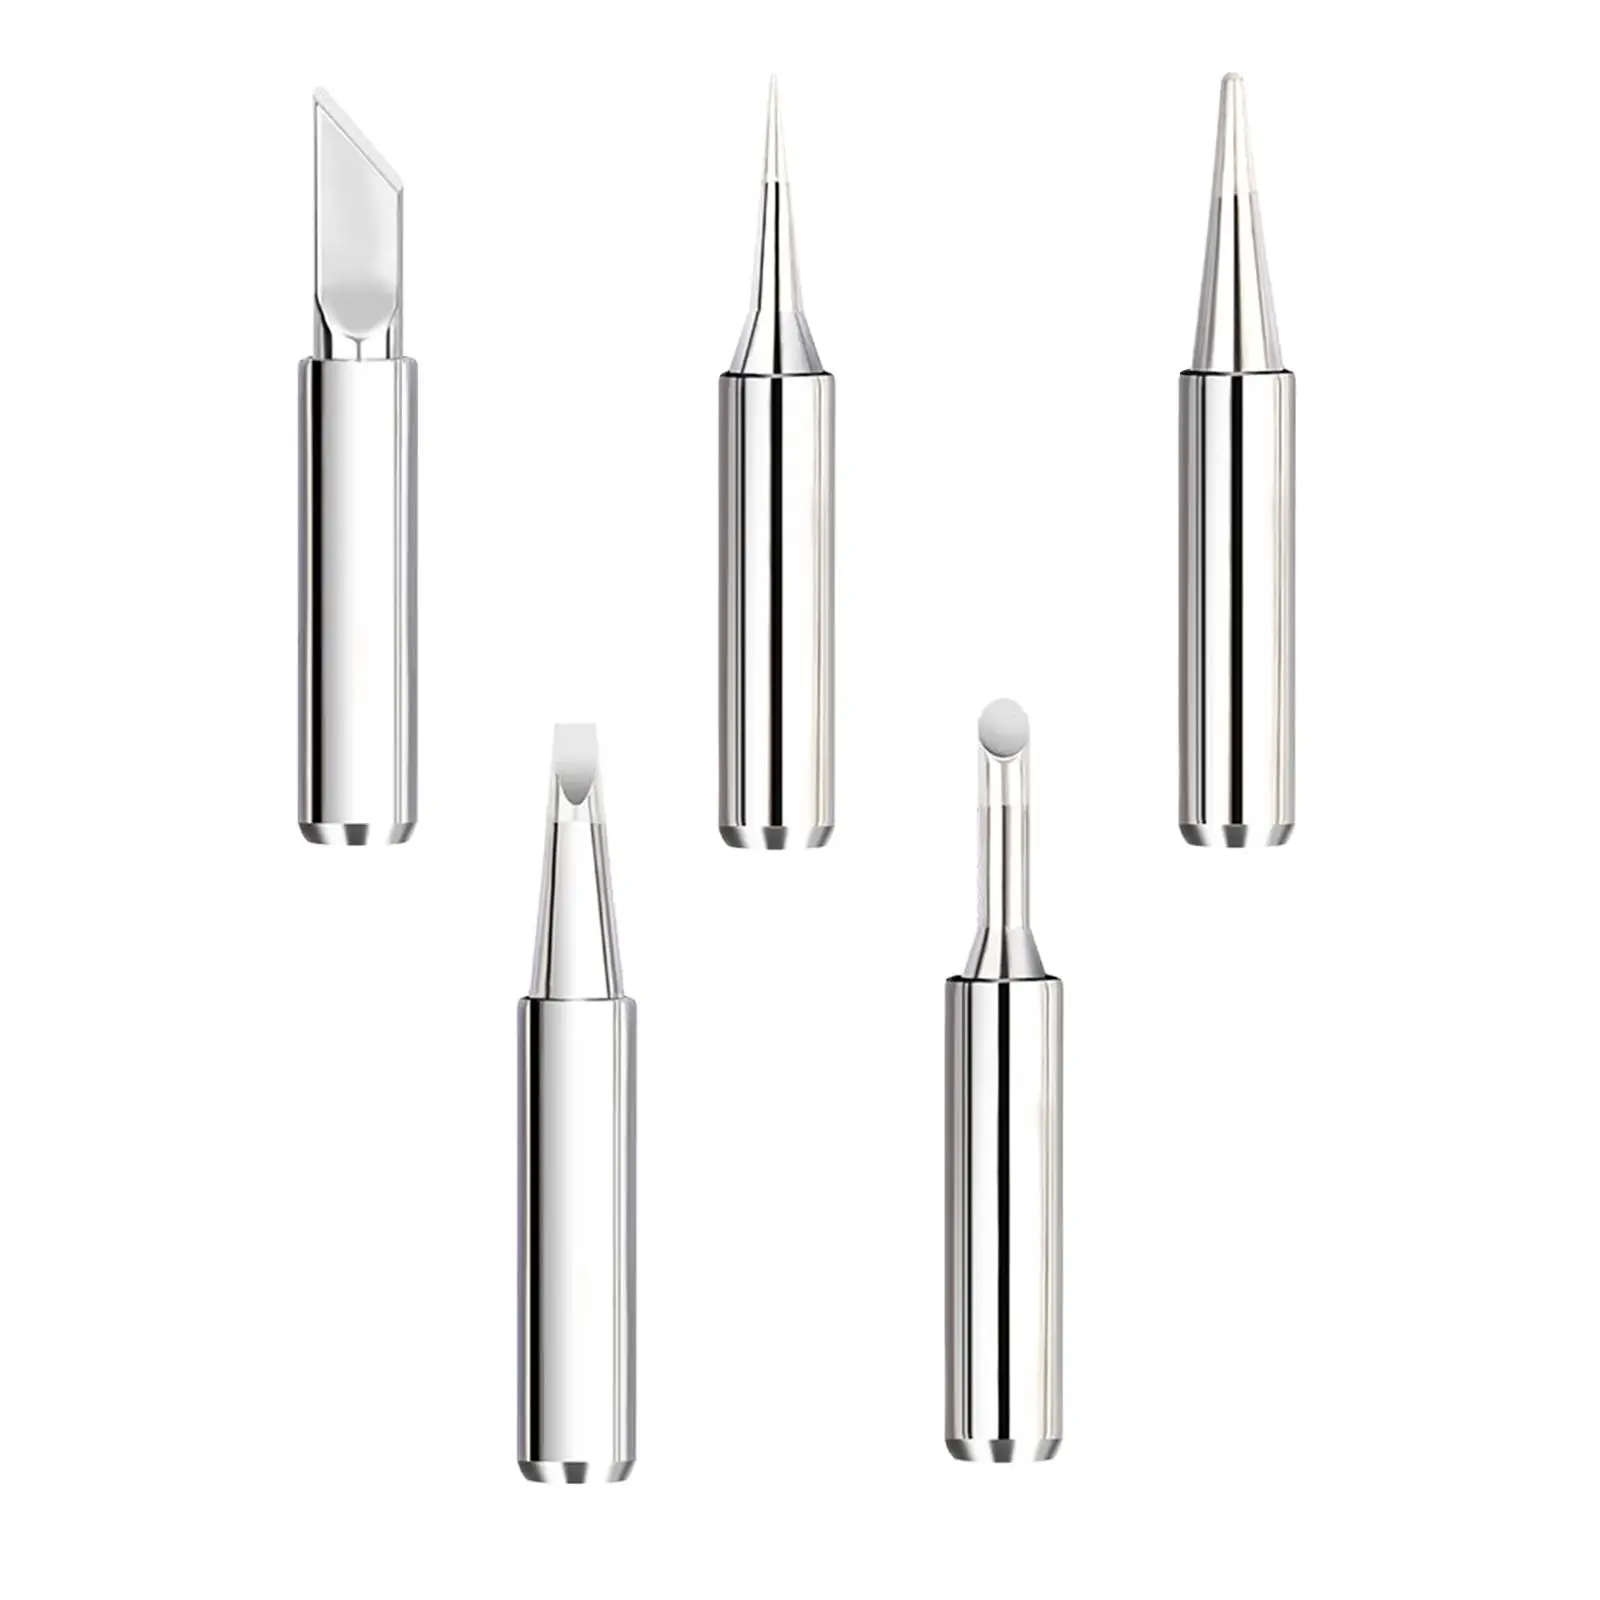 5x Soldering Iron Tips Durable for Welding Tools Soldering Station Parts